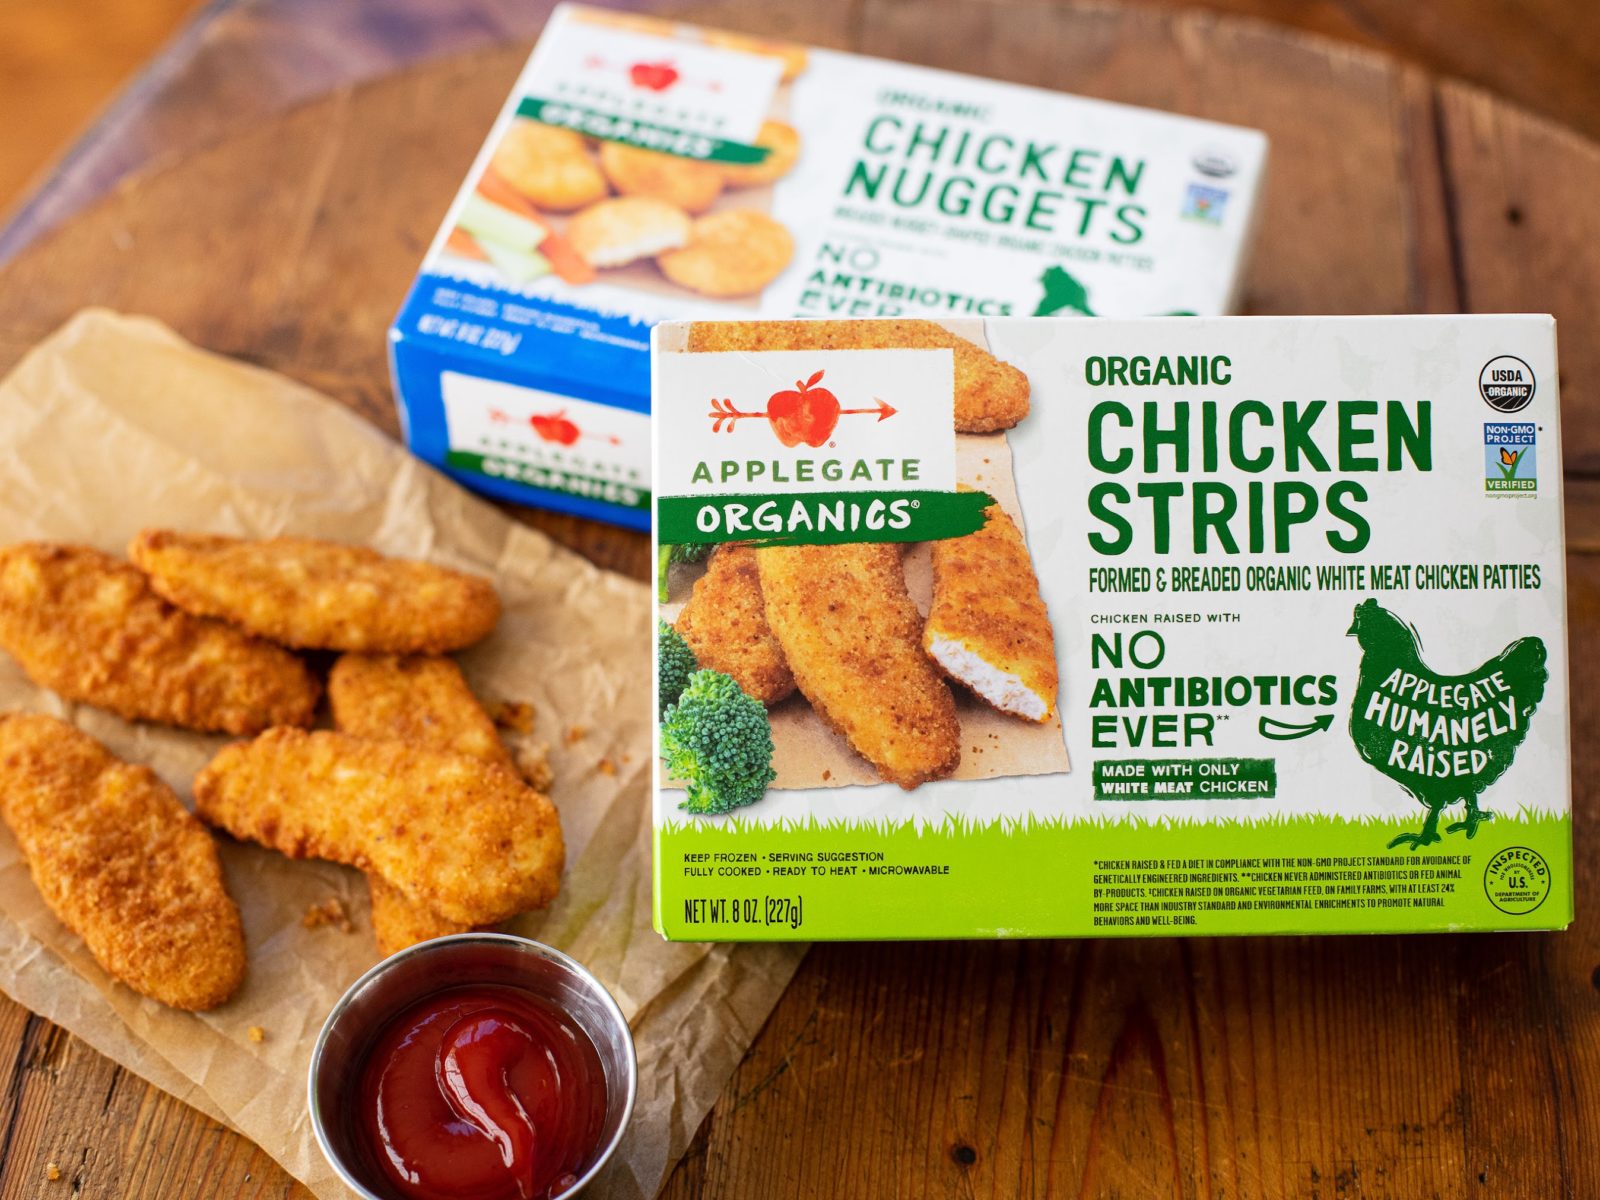 Get Applegate Organic Chicken Nuggets Or Strips Just $3.46 At Publix (Regular Price $9.69)